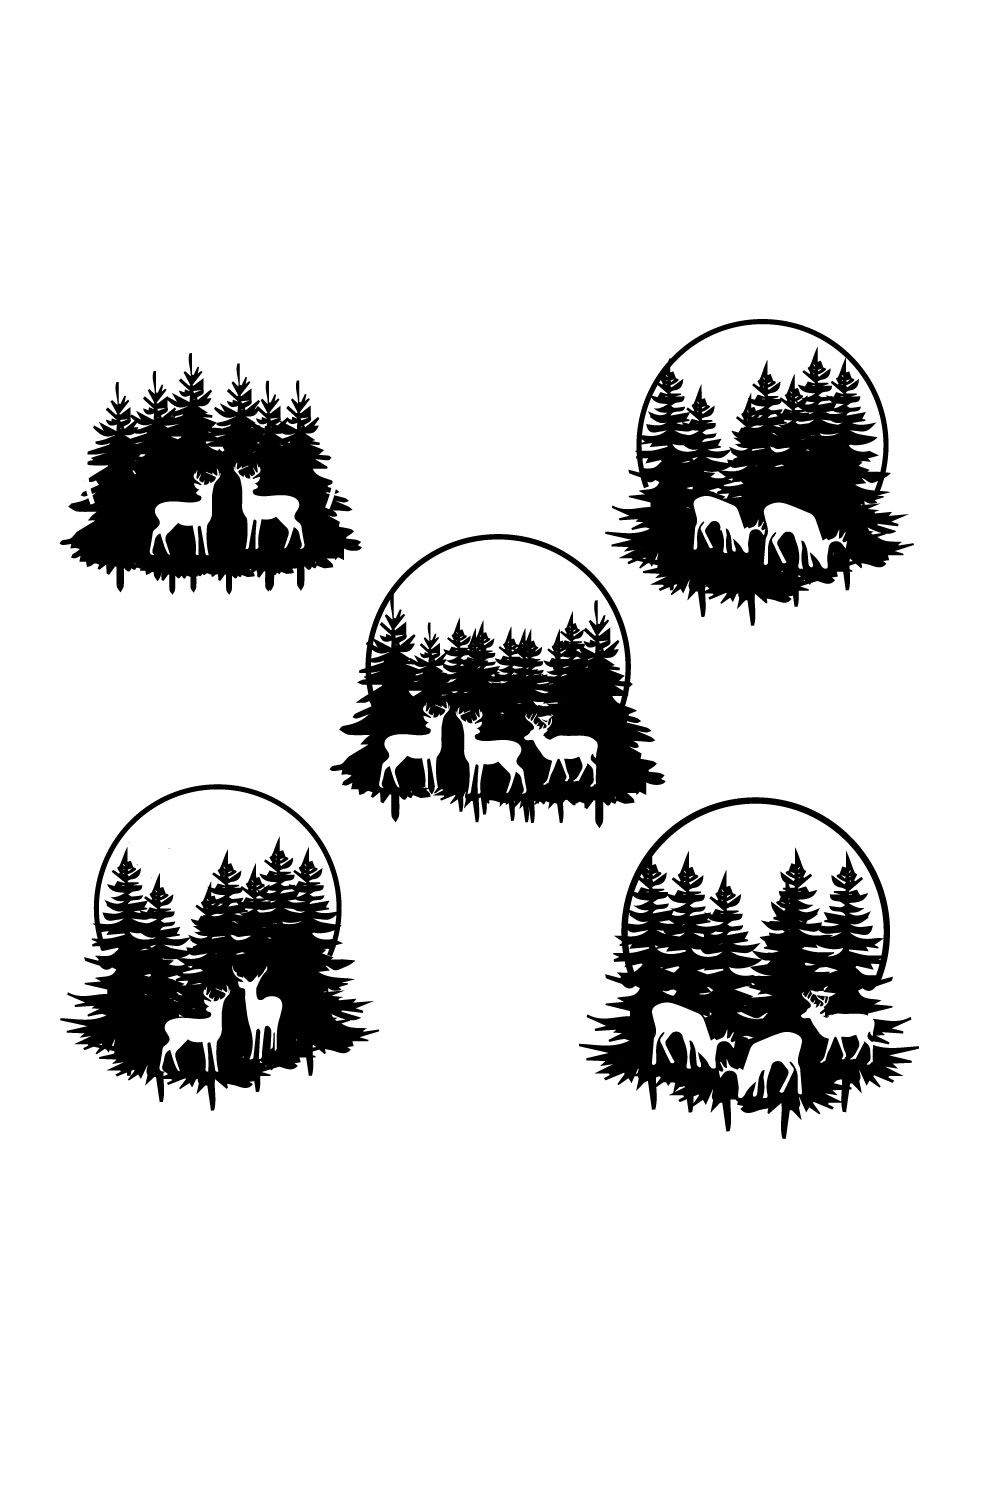 Set of three black and white silhouettes of deer and trees.